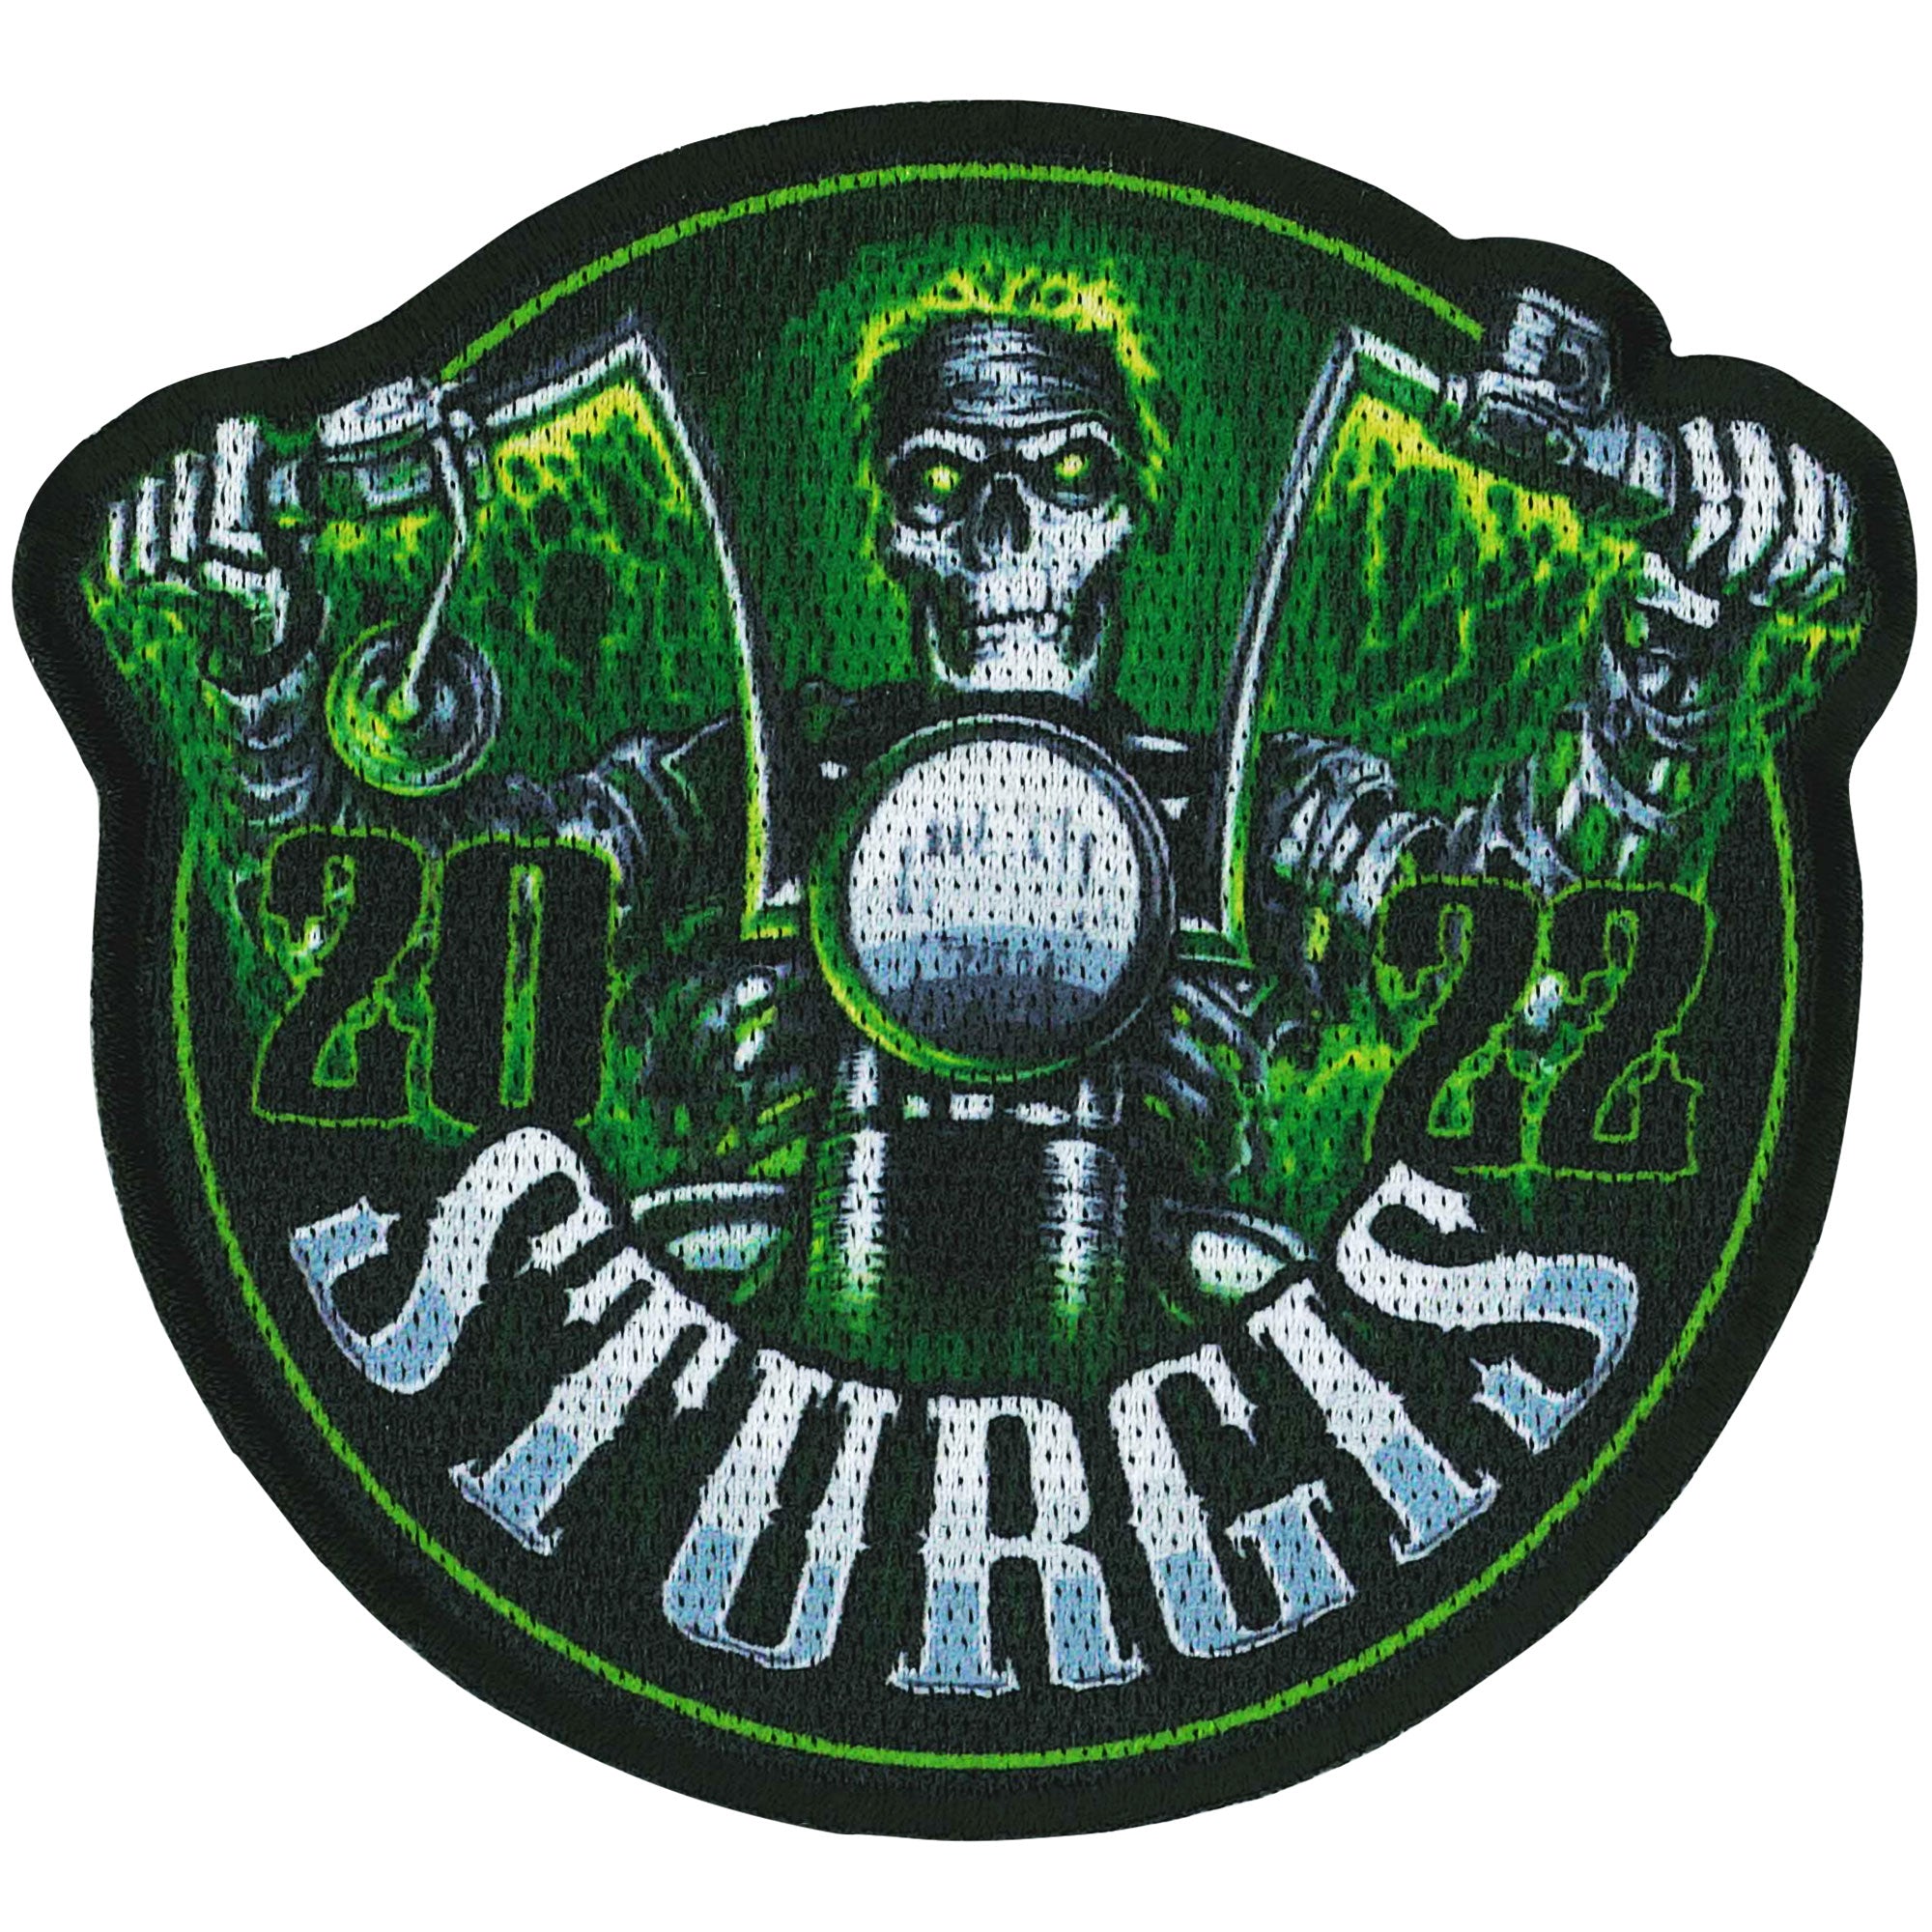 Skeleton MOTORCYCLE CLUB Back Patches For Jackets Patch Motorcycle Jacket  Patches